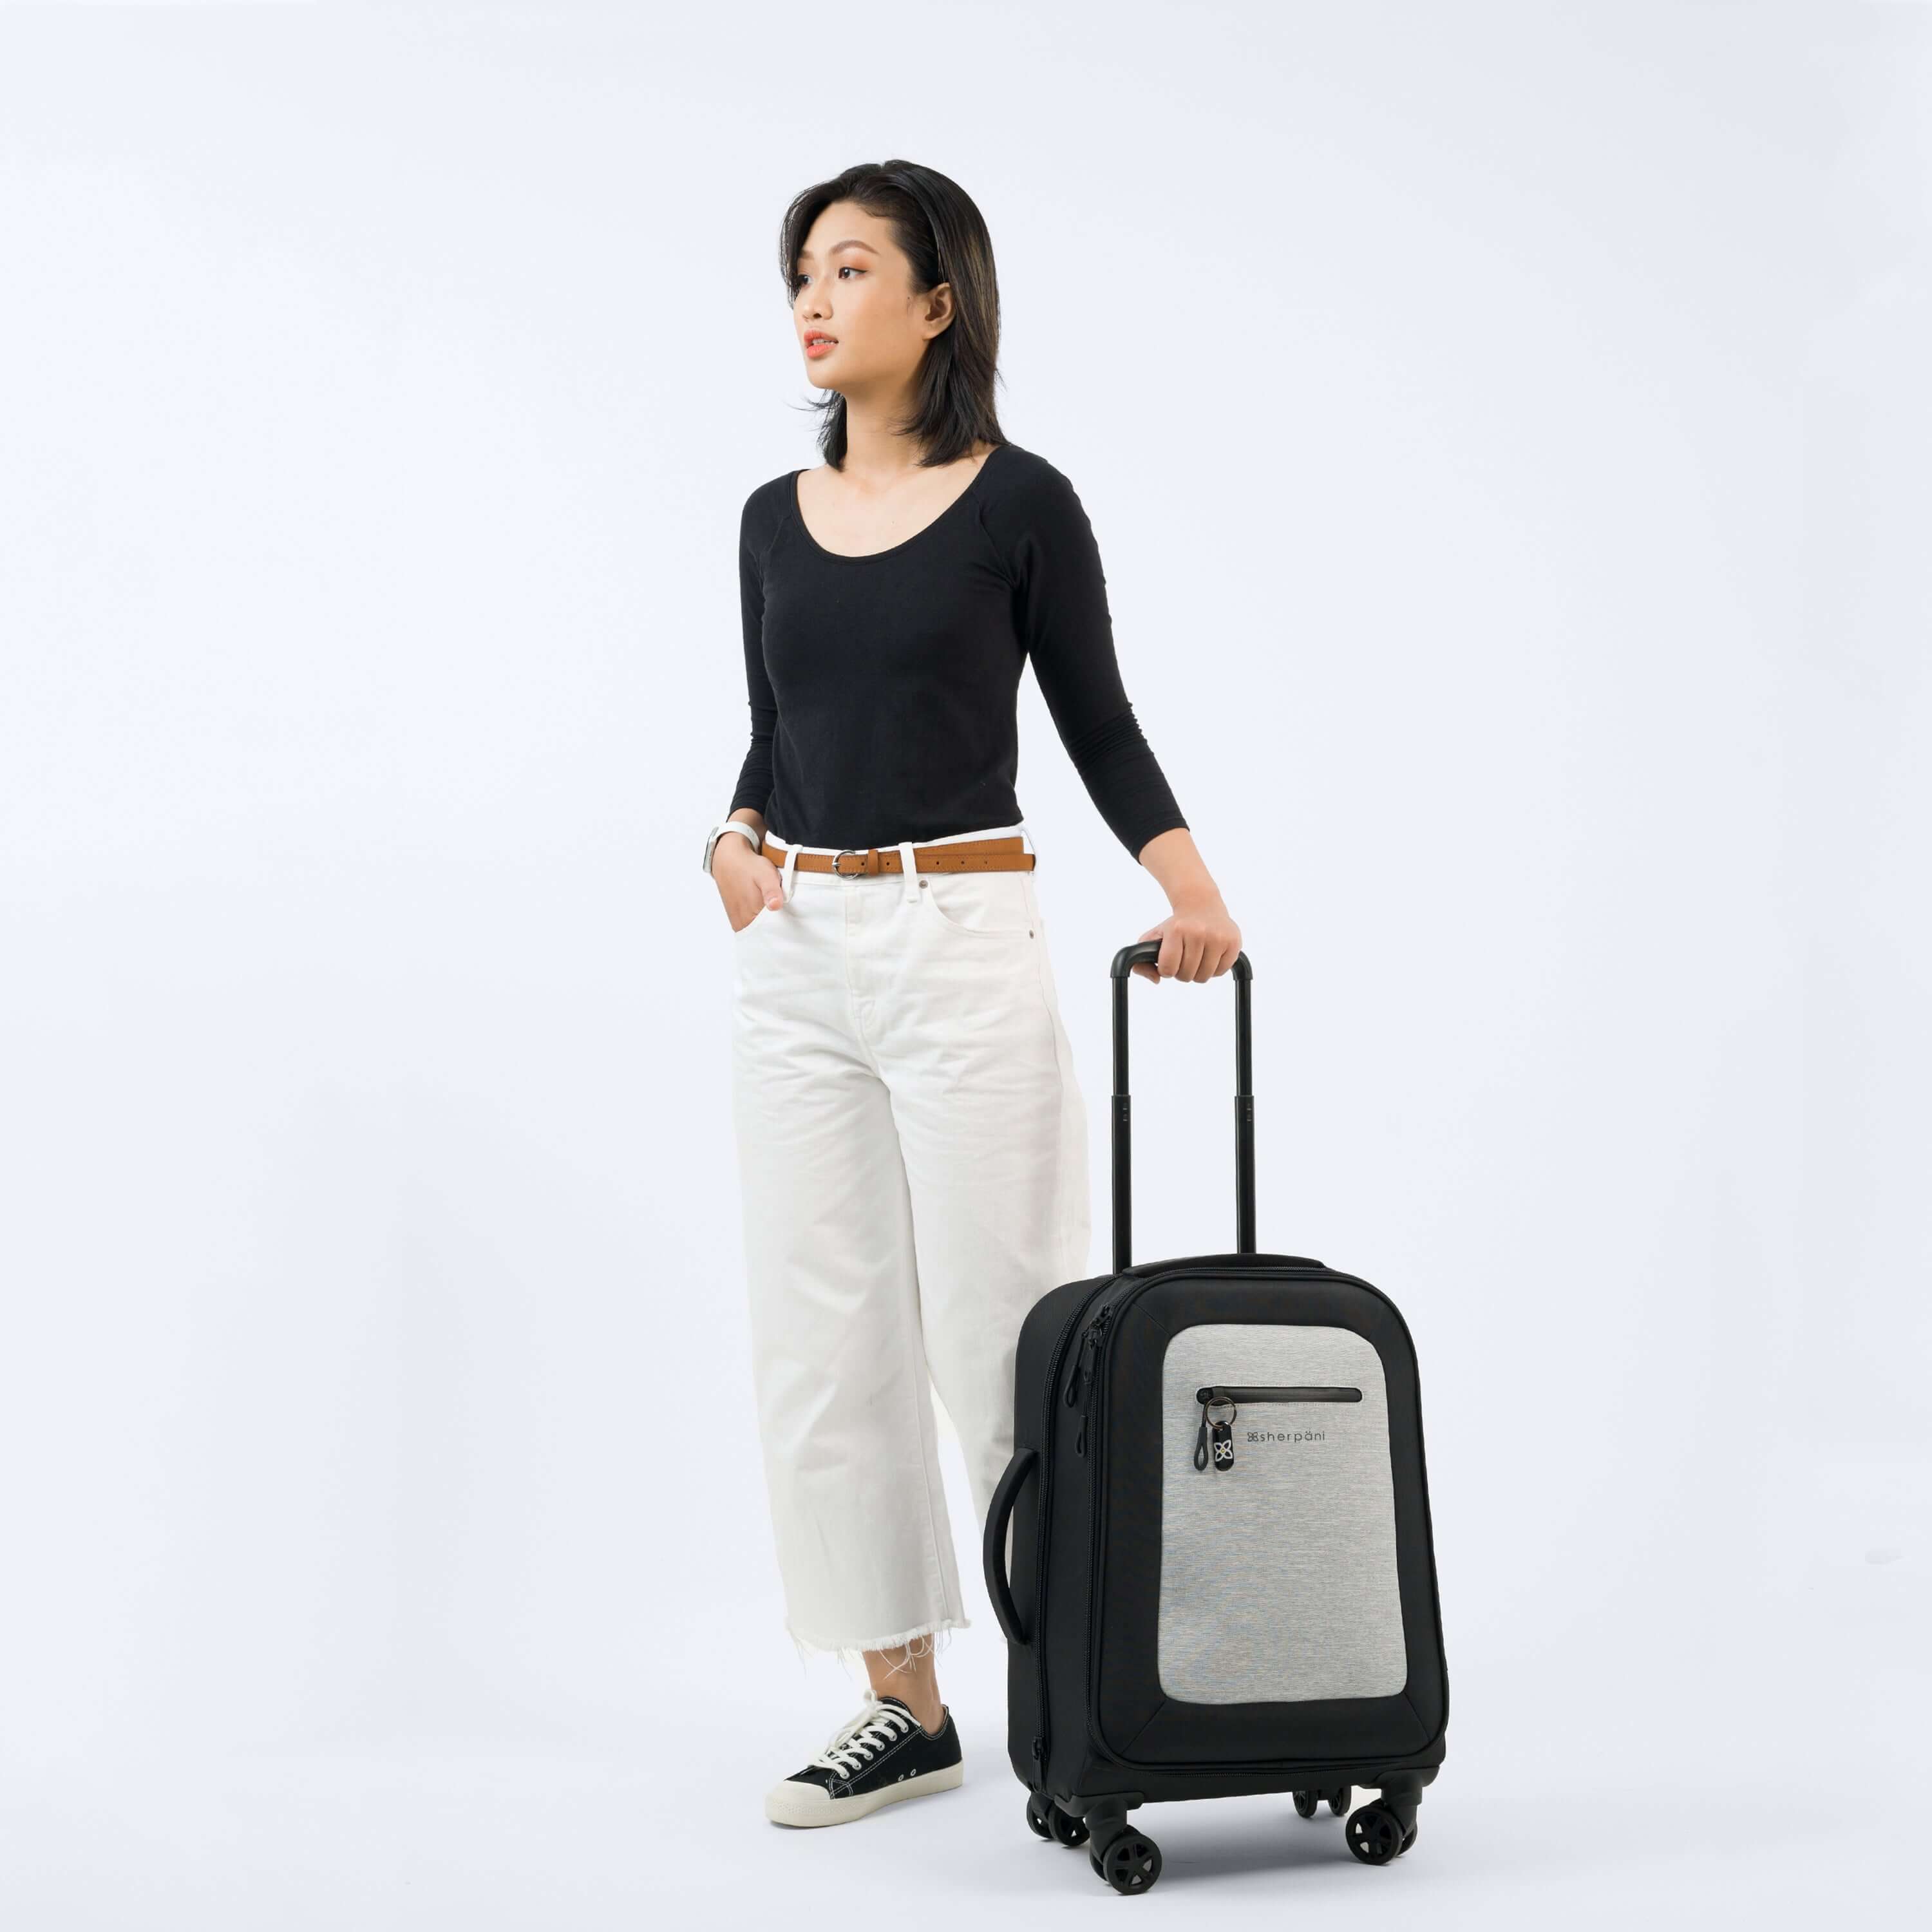 A dark haired woman stands at an angle to the camera. She is wearing a black top, white jeans and Converse. Her left hand holds the luggage handle of Sherpani&#39;s Anti-Theft luggage, the Latitude in Sterling, which stands next to her.